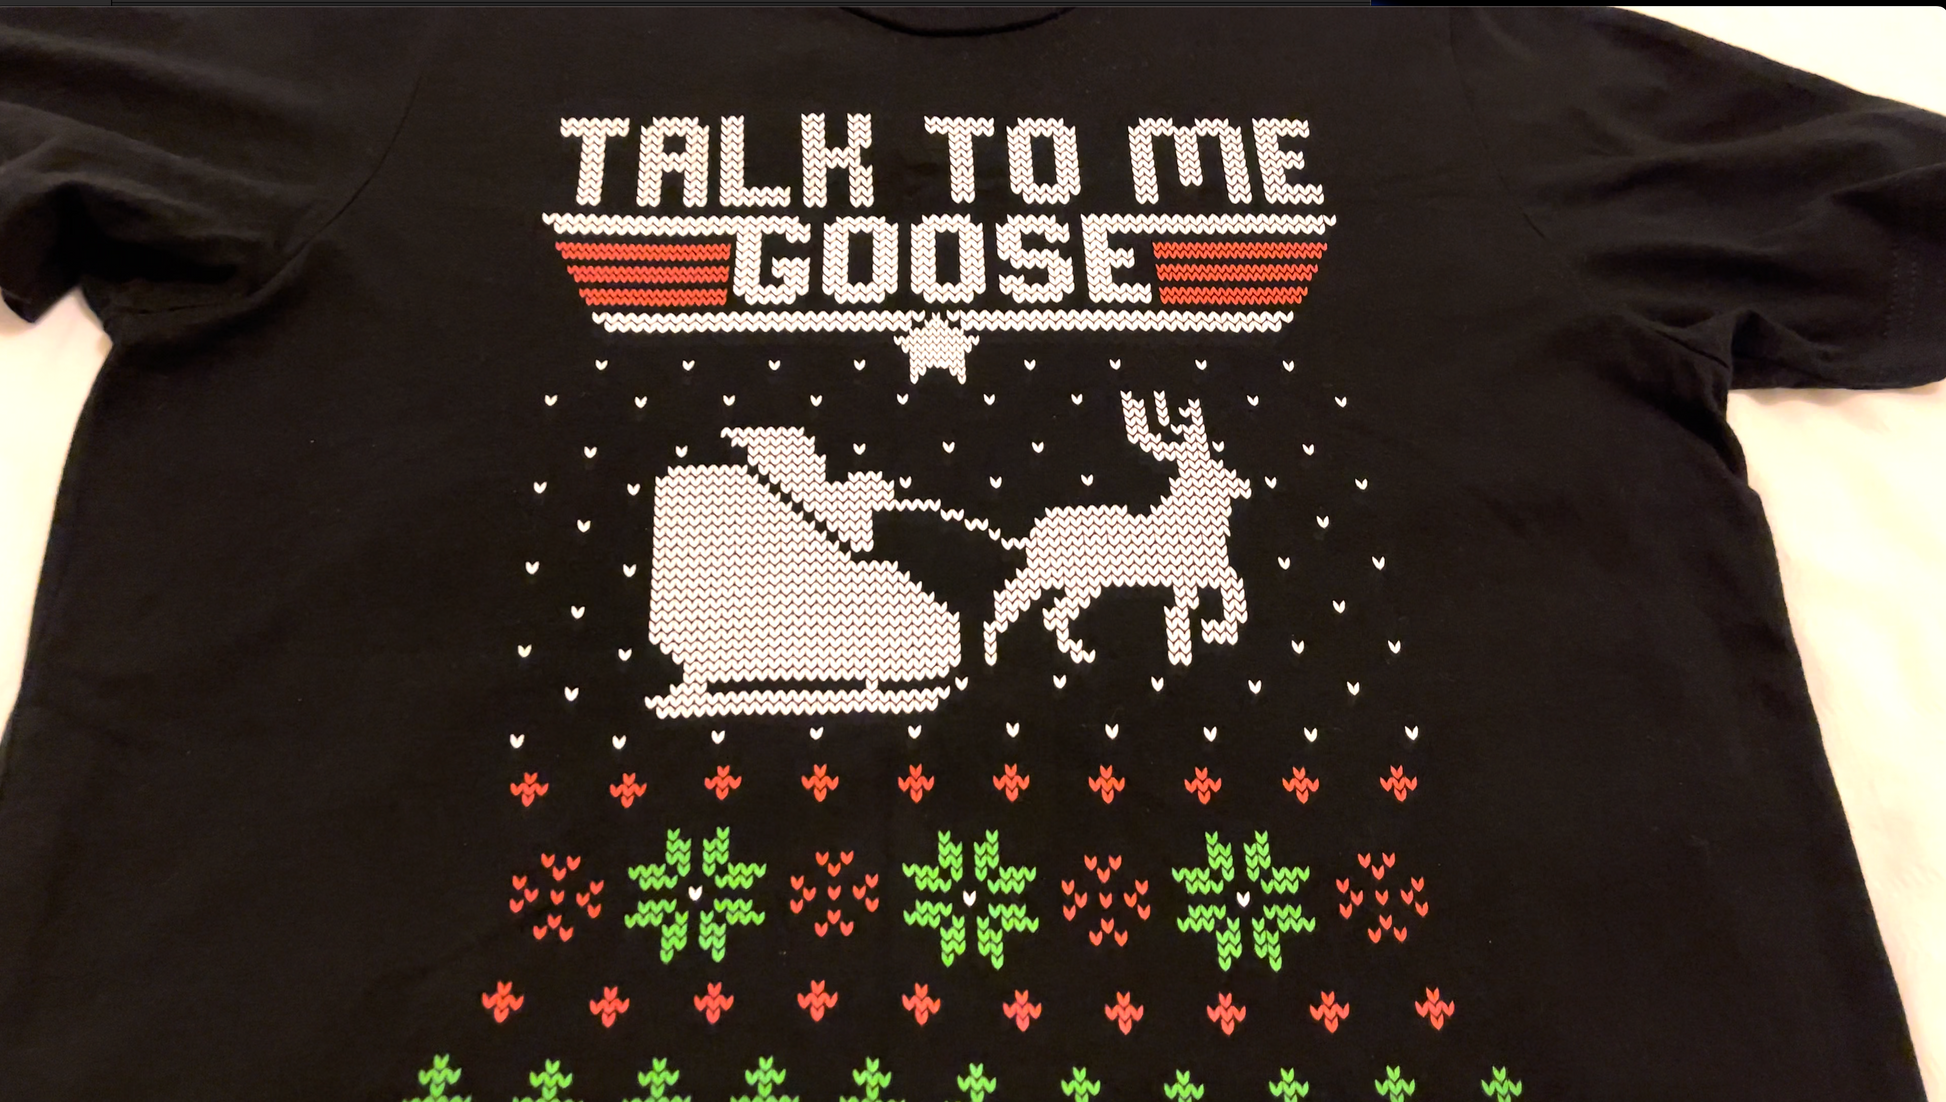 Talk To Me Goose Youth S/S Ugly Christmas T-Shirt